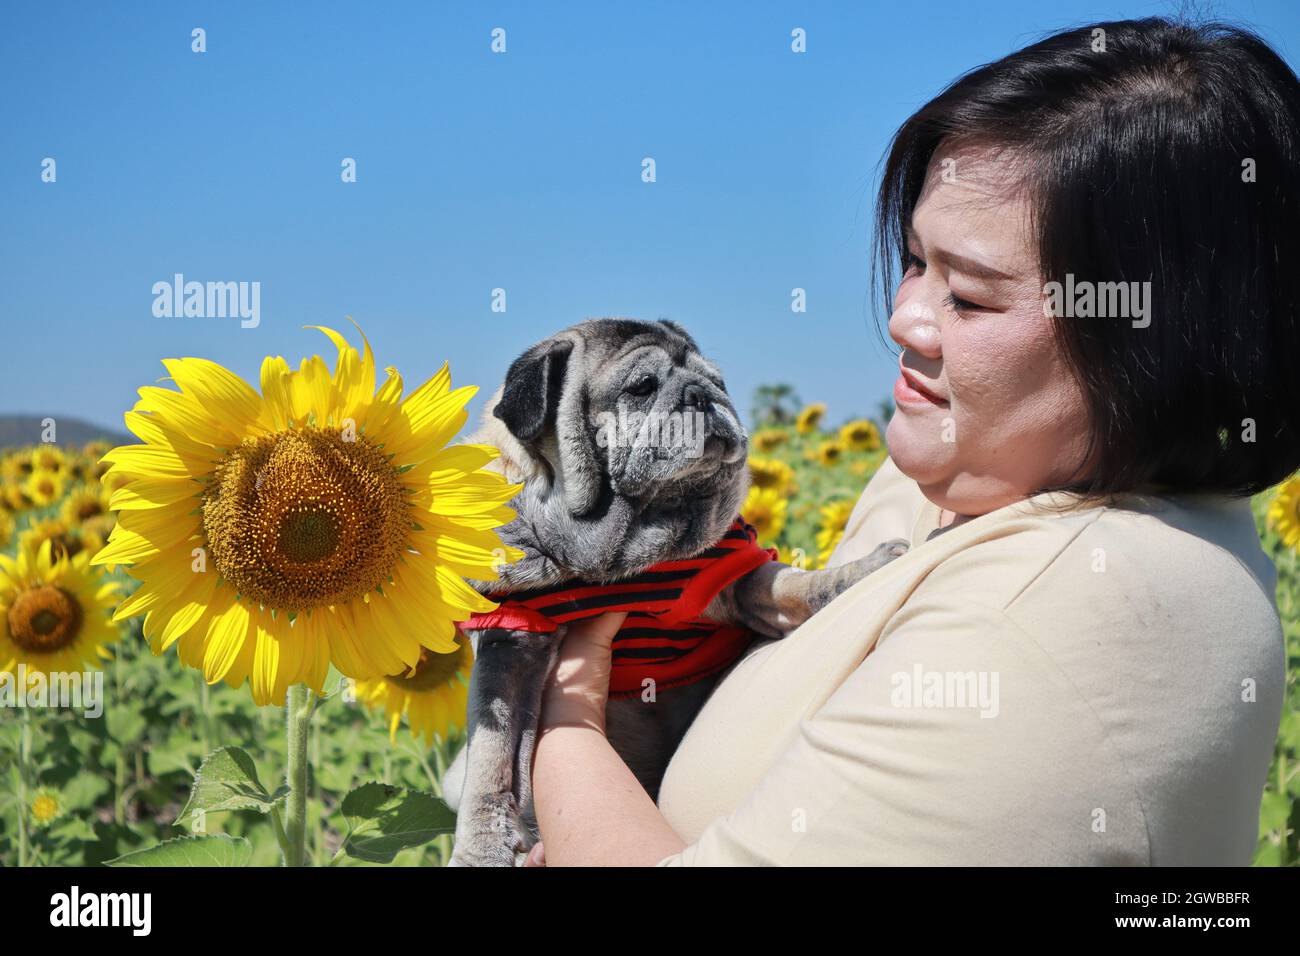 Woman Carrying Pug While Standing Amidst Plants Stock Photo